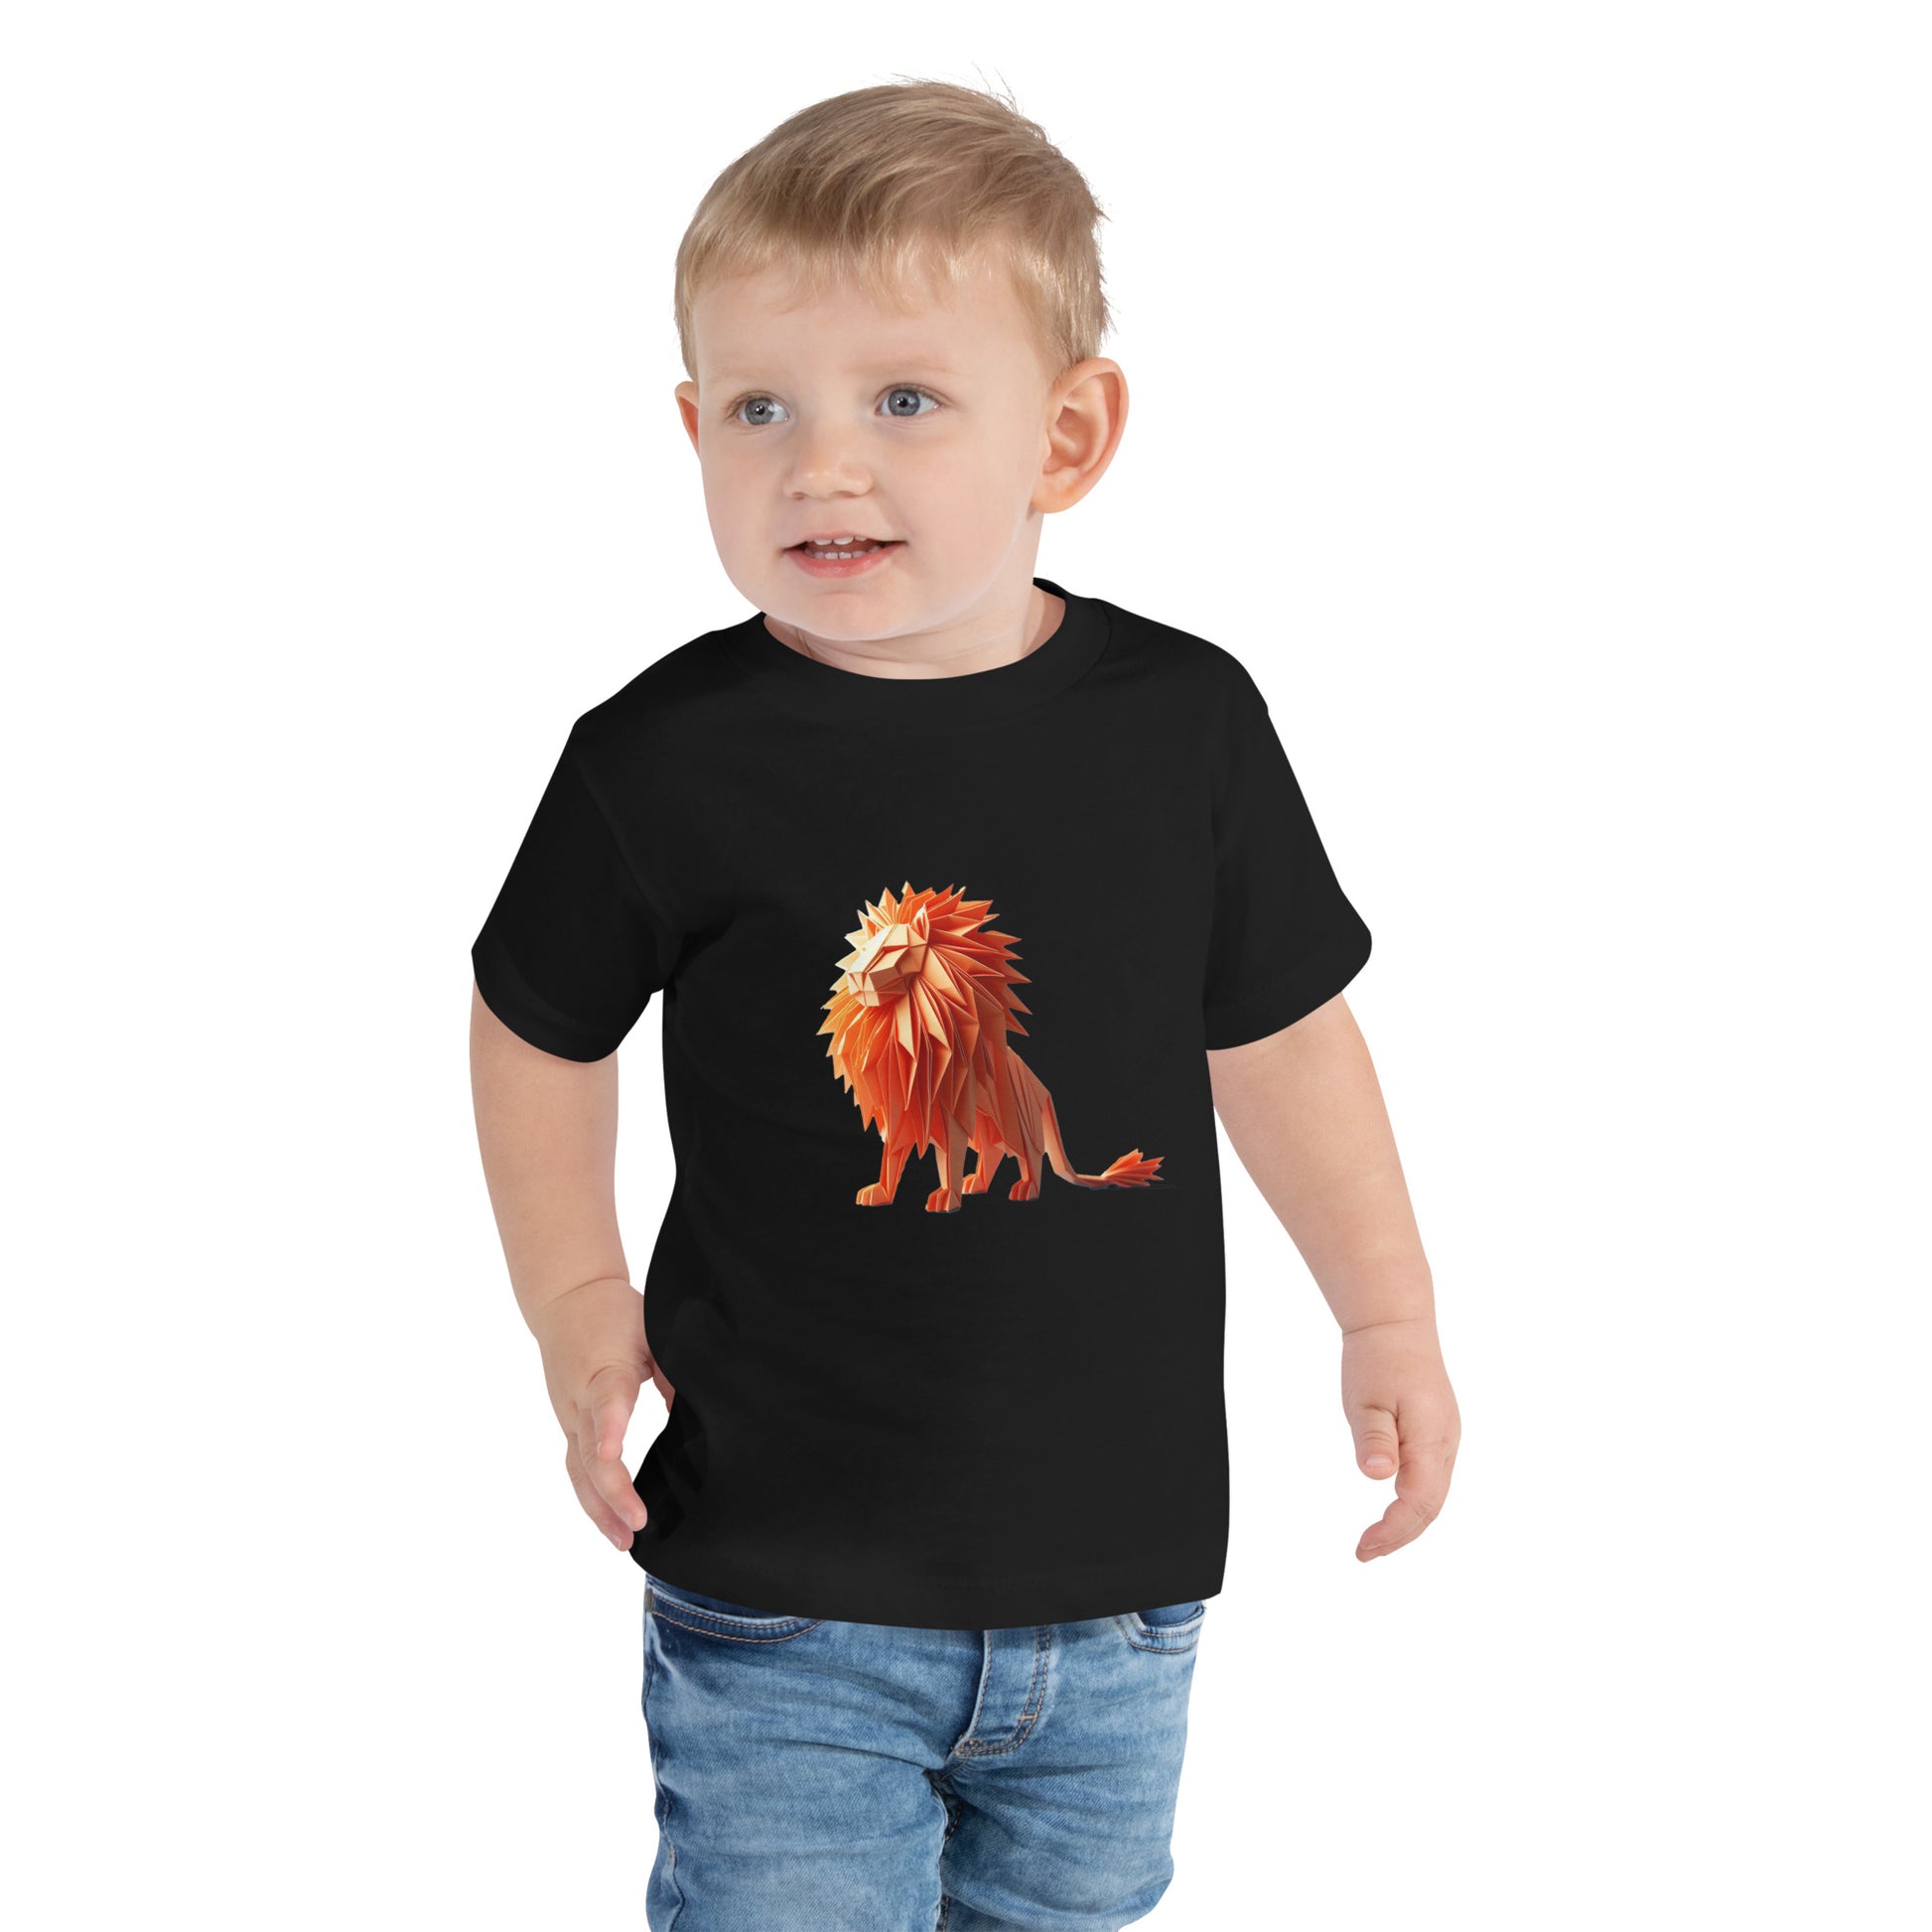 Toddler with a black T-shirt with a print of a lion